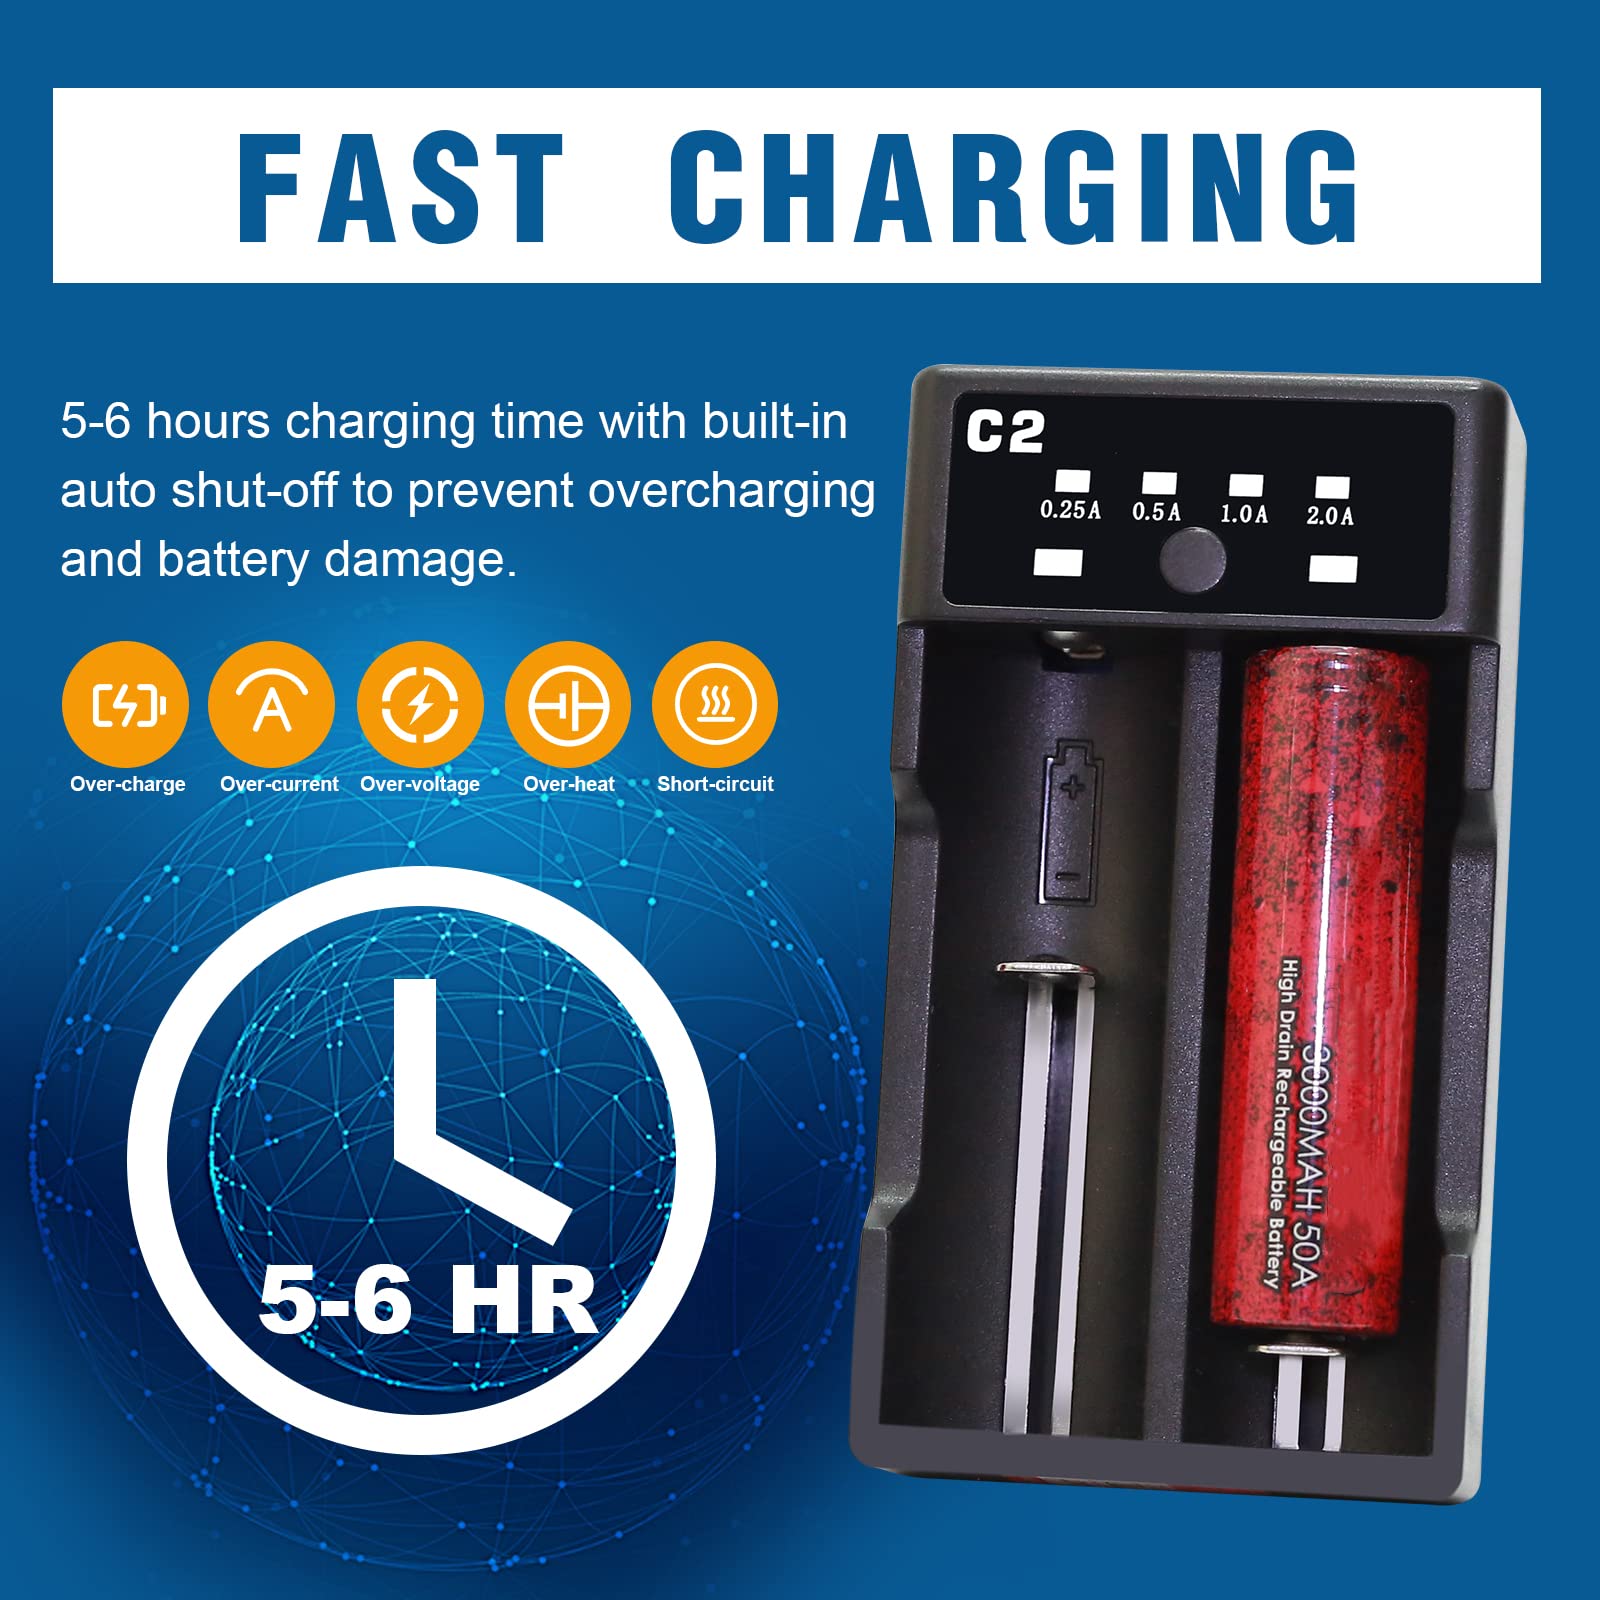 Aweite Universal Battery Charger, 2-Bay Battery Smart Charger for Li-ion/NiMH/NiCD, for 18650, 16340, 26650, AA, AAA, and More 3.7V USB Fast Portable Battery Charger